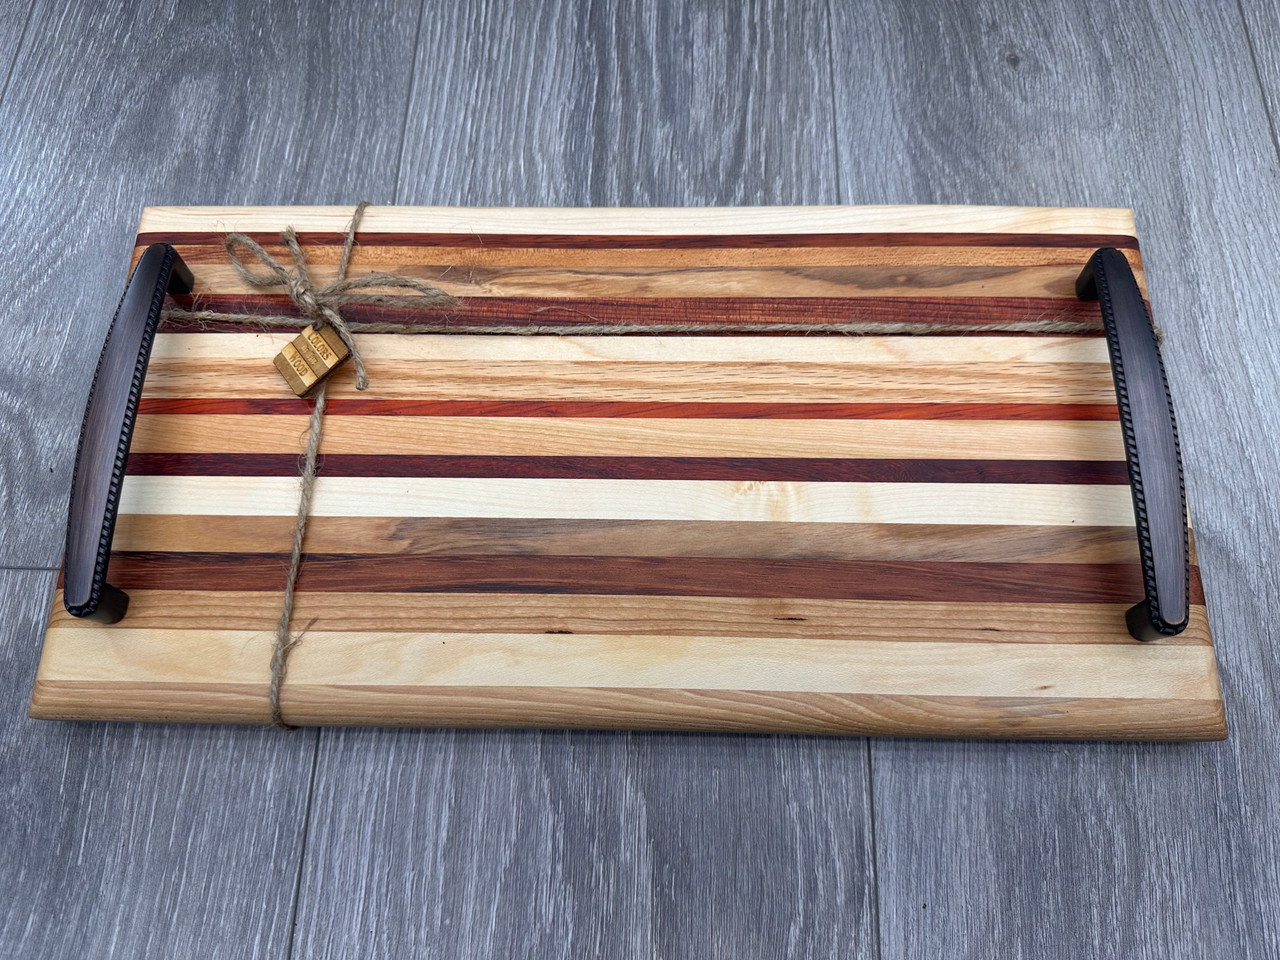 Handmade striped cutting or serving board with hanging feature